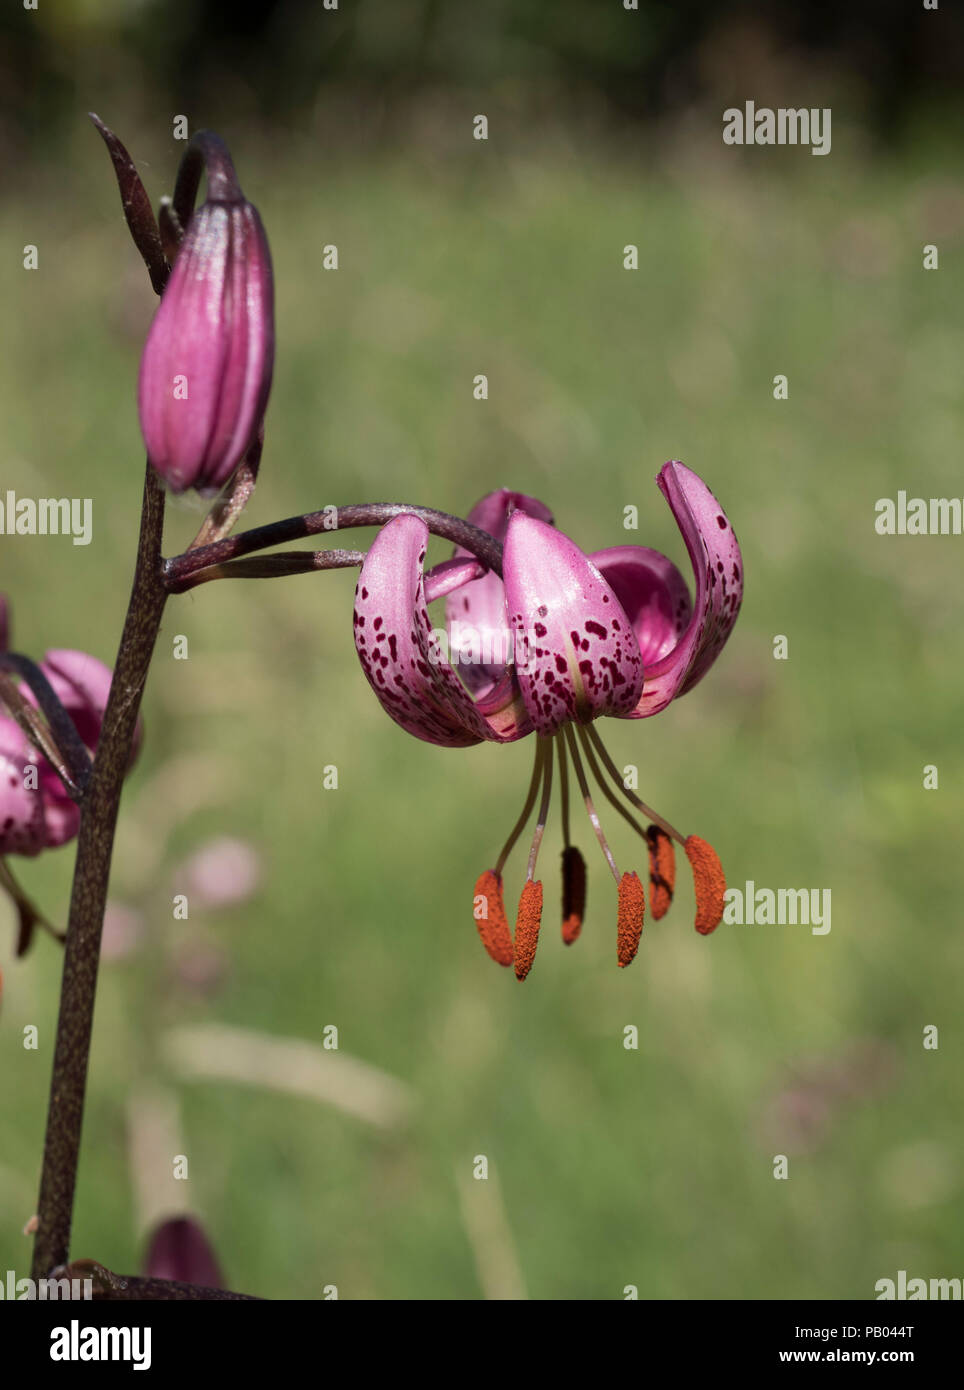 Martagon or Turk's Cap Lily, Lilium martagon, close-up of flowers, growing in grassland, Worcestershire, UK. Stock Photo